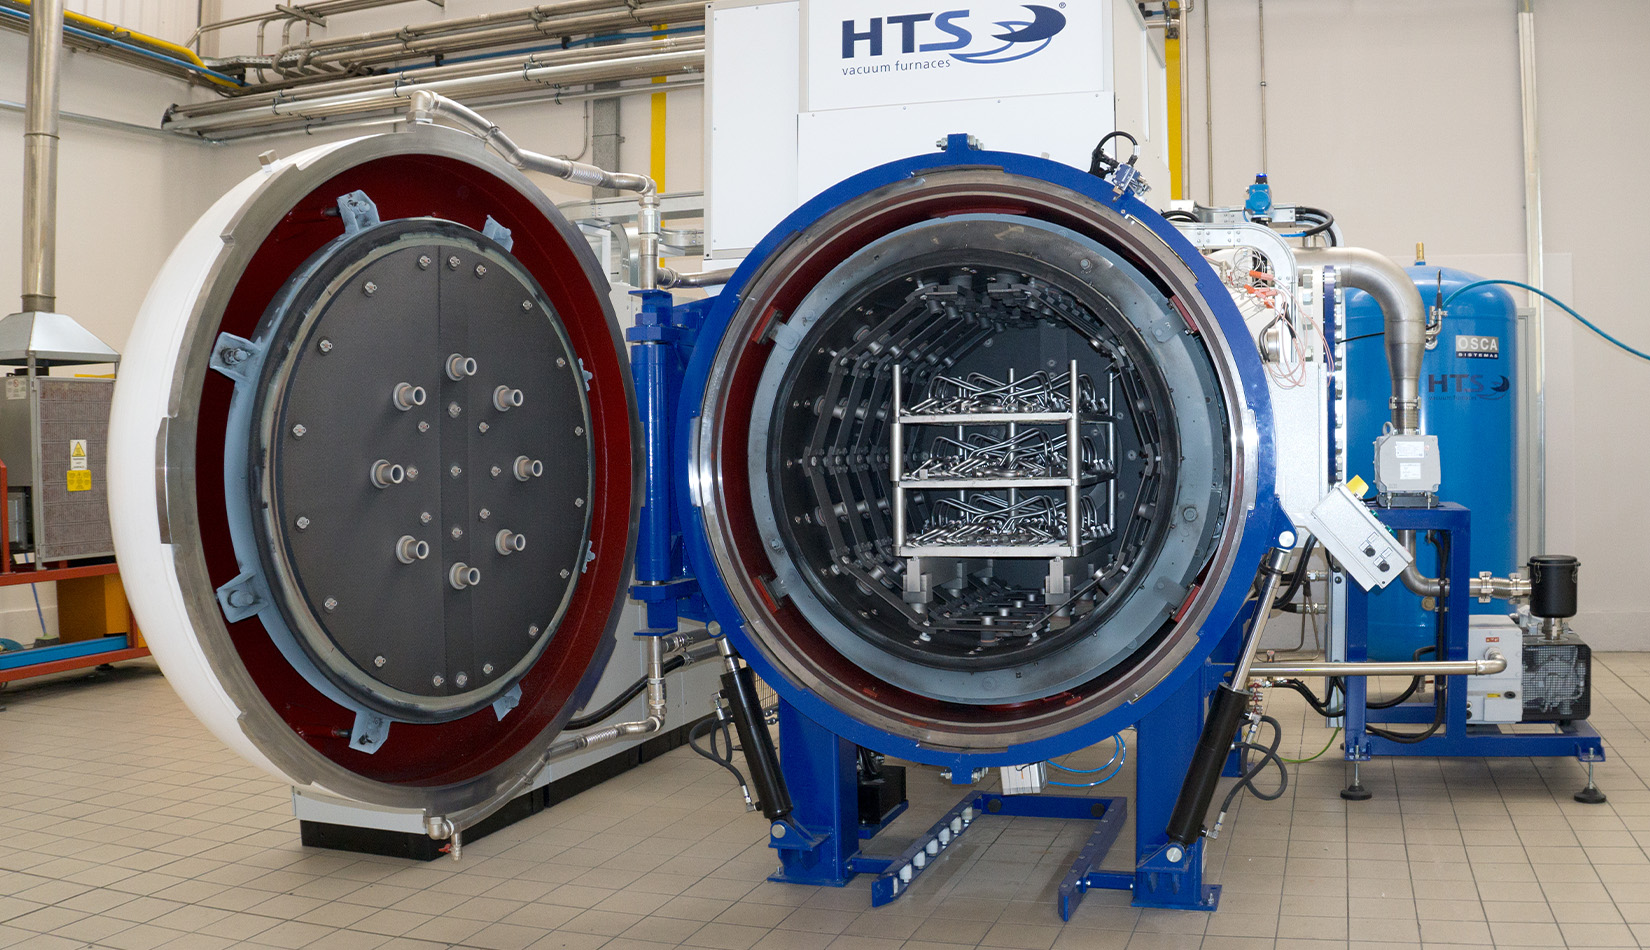 We improved our production system with a new HTS vacuum brazing furnace